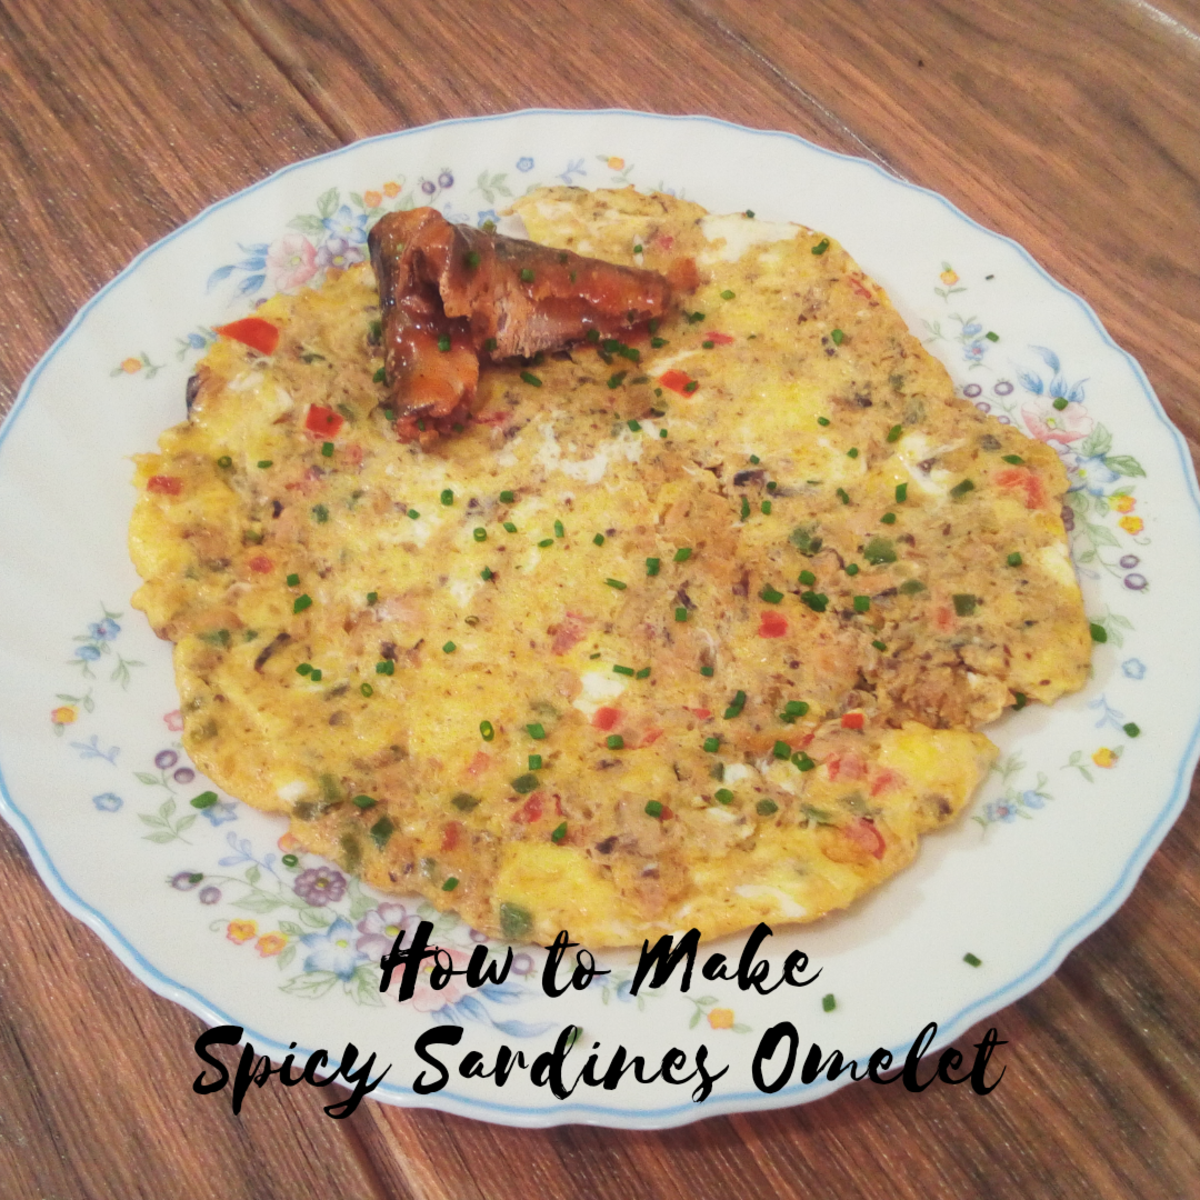 Learn how to make a spicy sardine omelet!